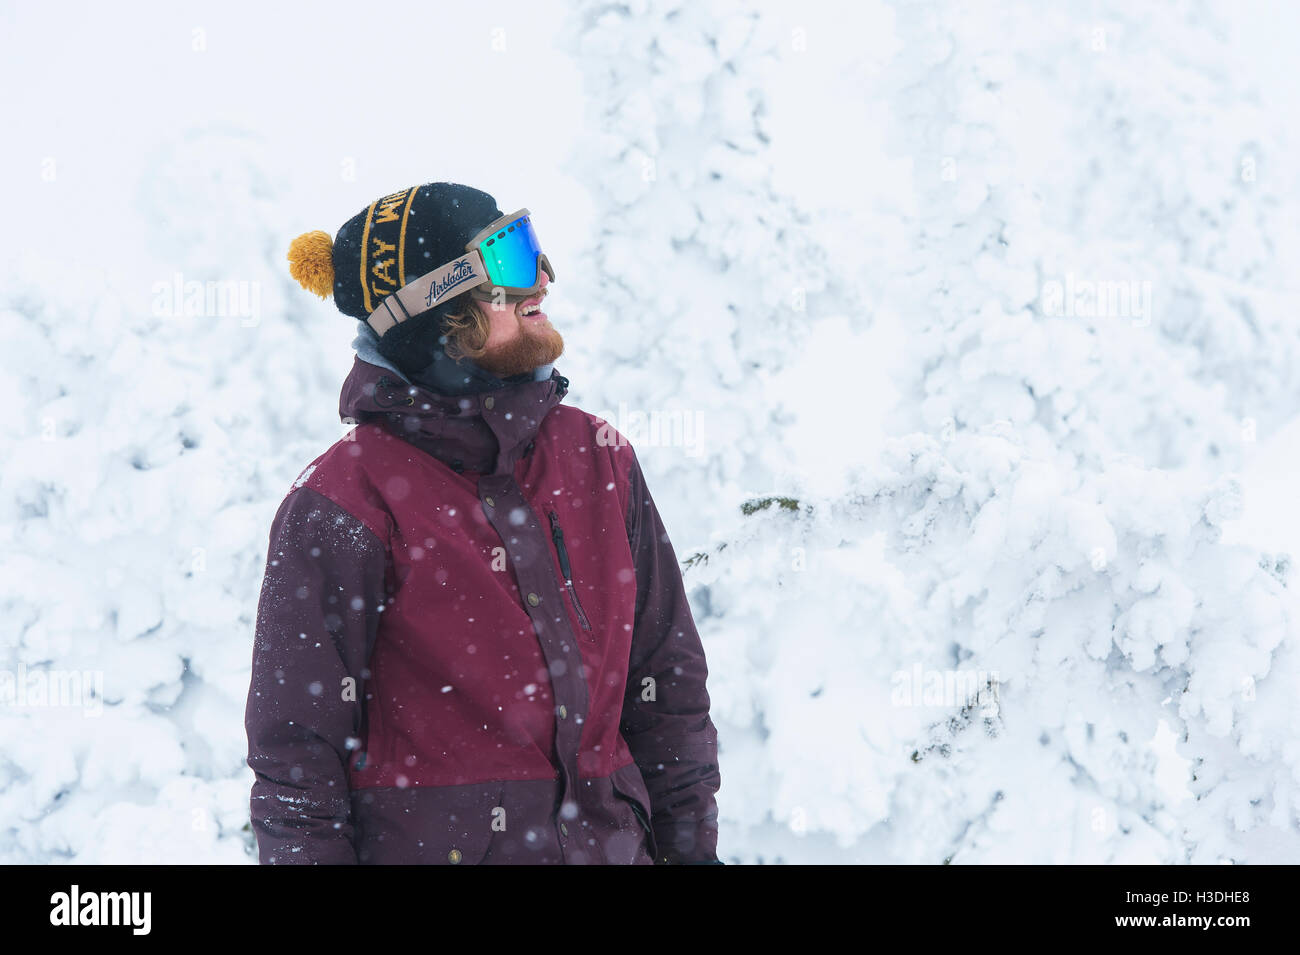 Portrait of a snowboarder during a snow storm Stock Photo